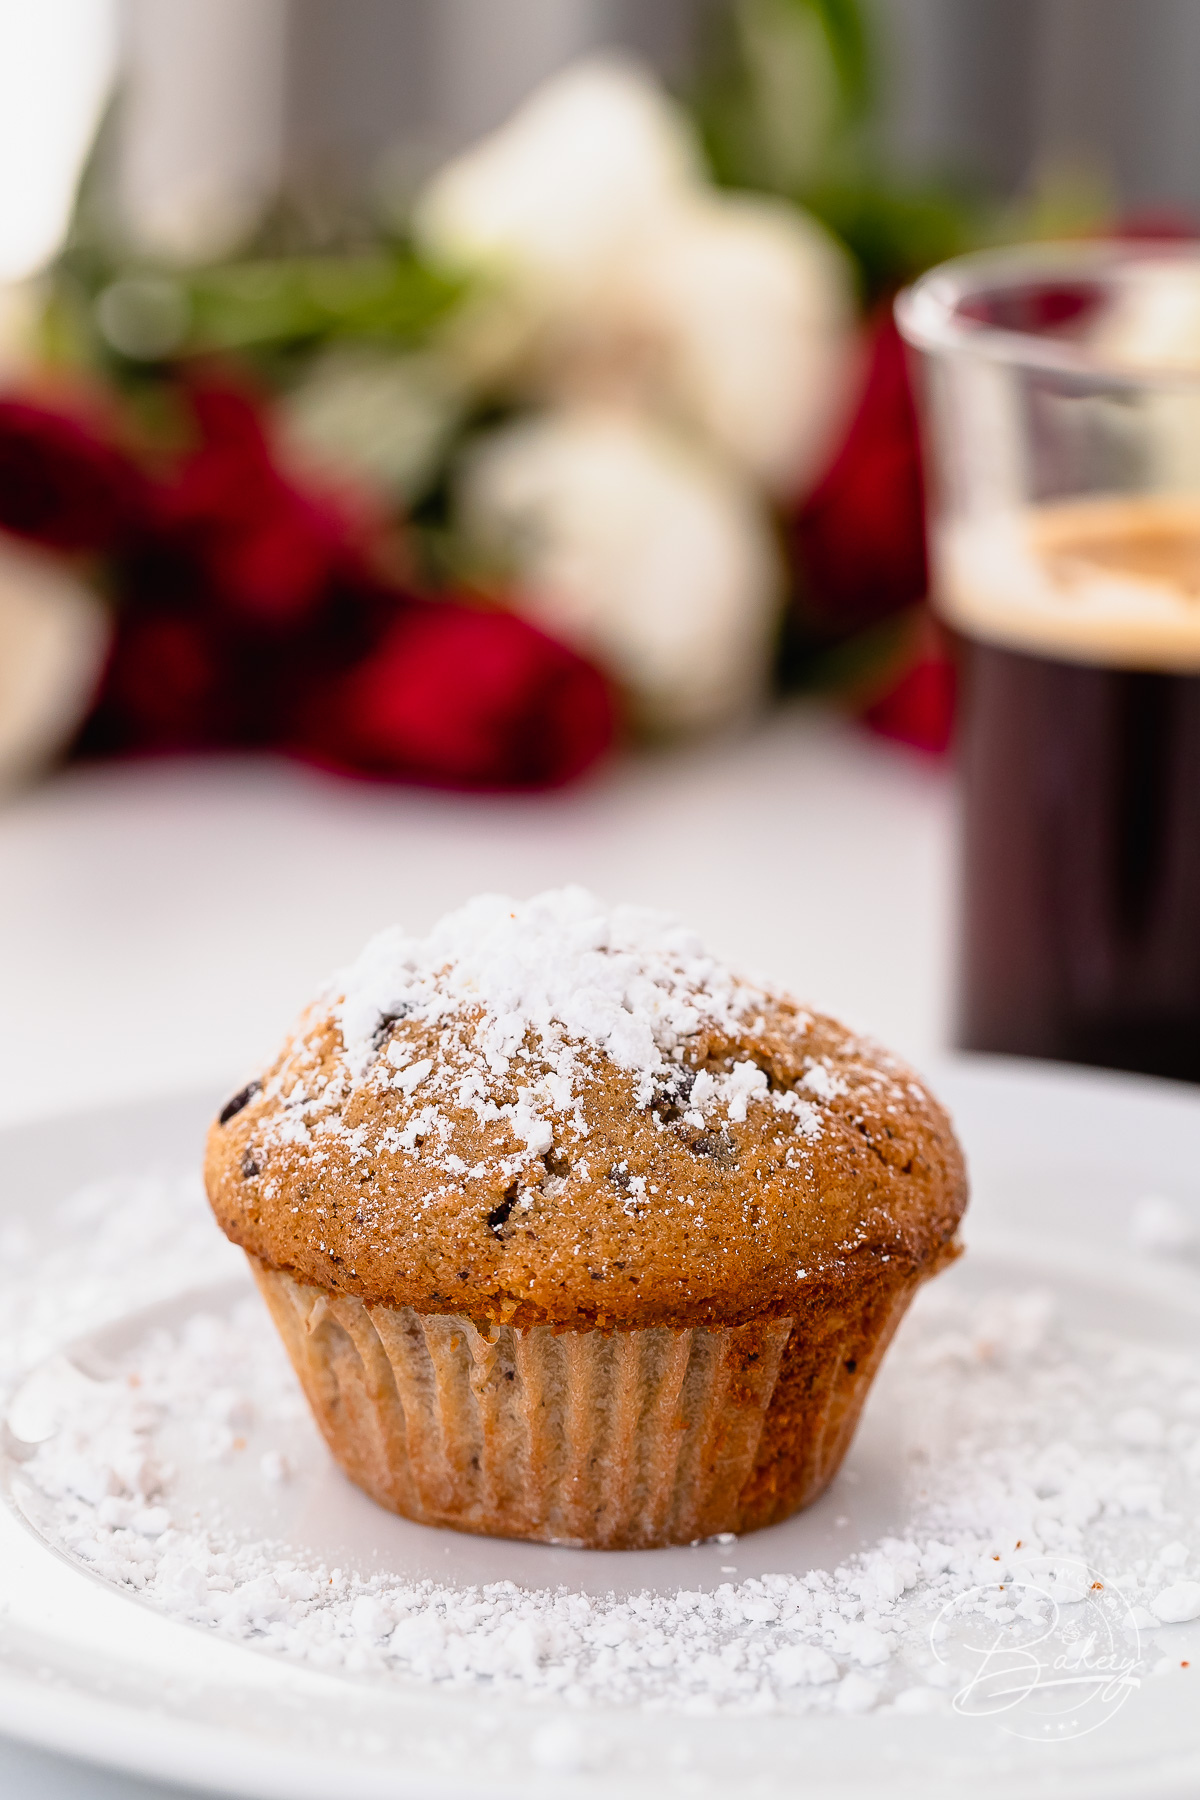 Espresso muffins recipe - coffee muffins baking instructions - muffins with chocolate, nuts, fruits - quick made muffins - easy baking recipe for kids and adults - Mini cake recipe for delicious coffee muffins. Muffins and cupcakes with coffee flavor, dark chocolate, nuts.